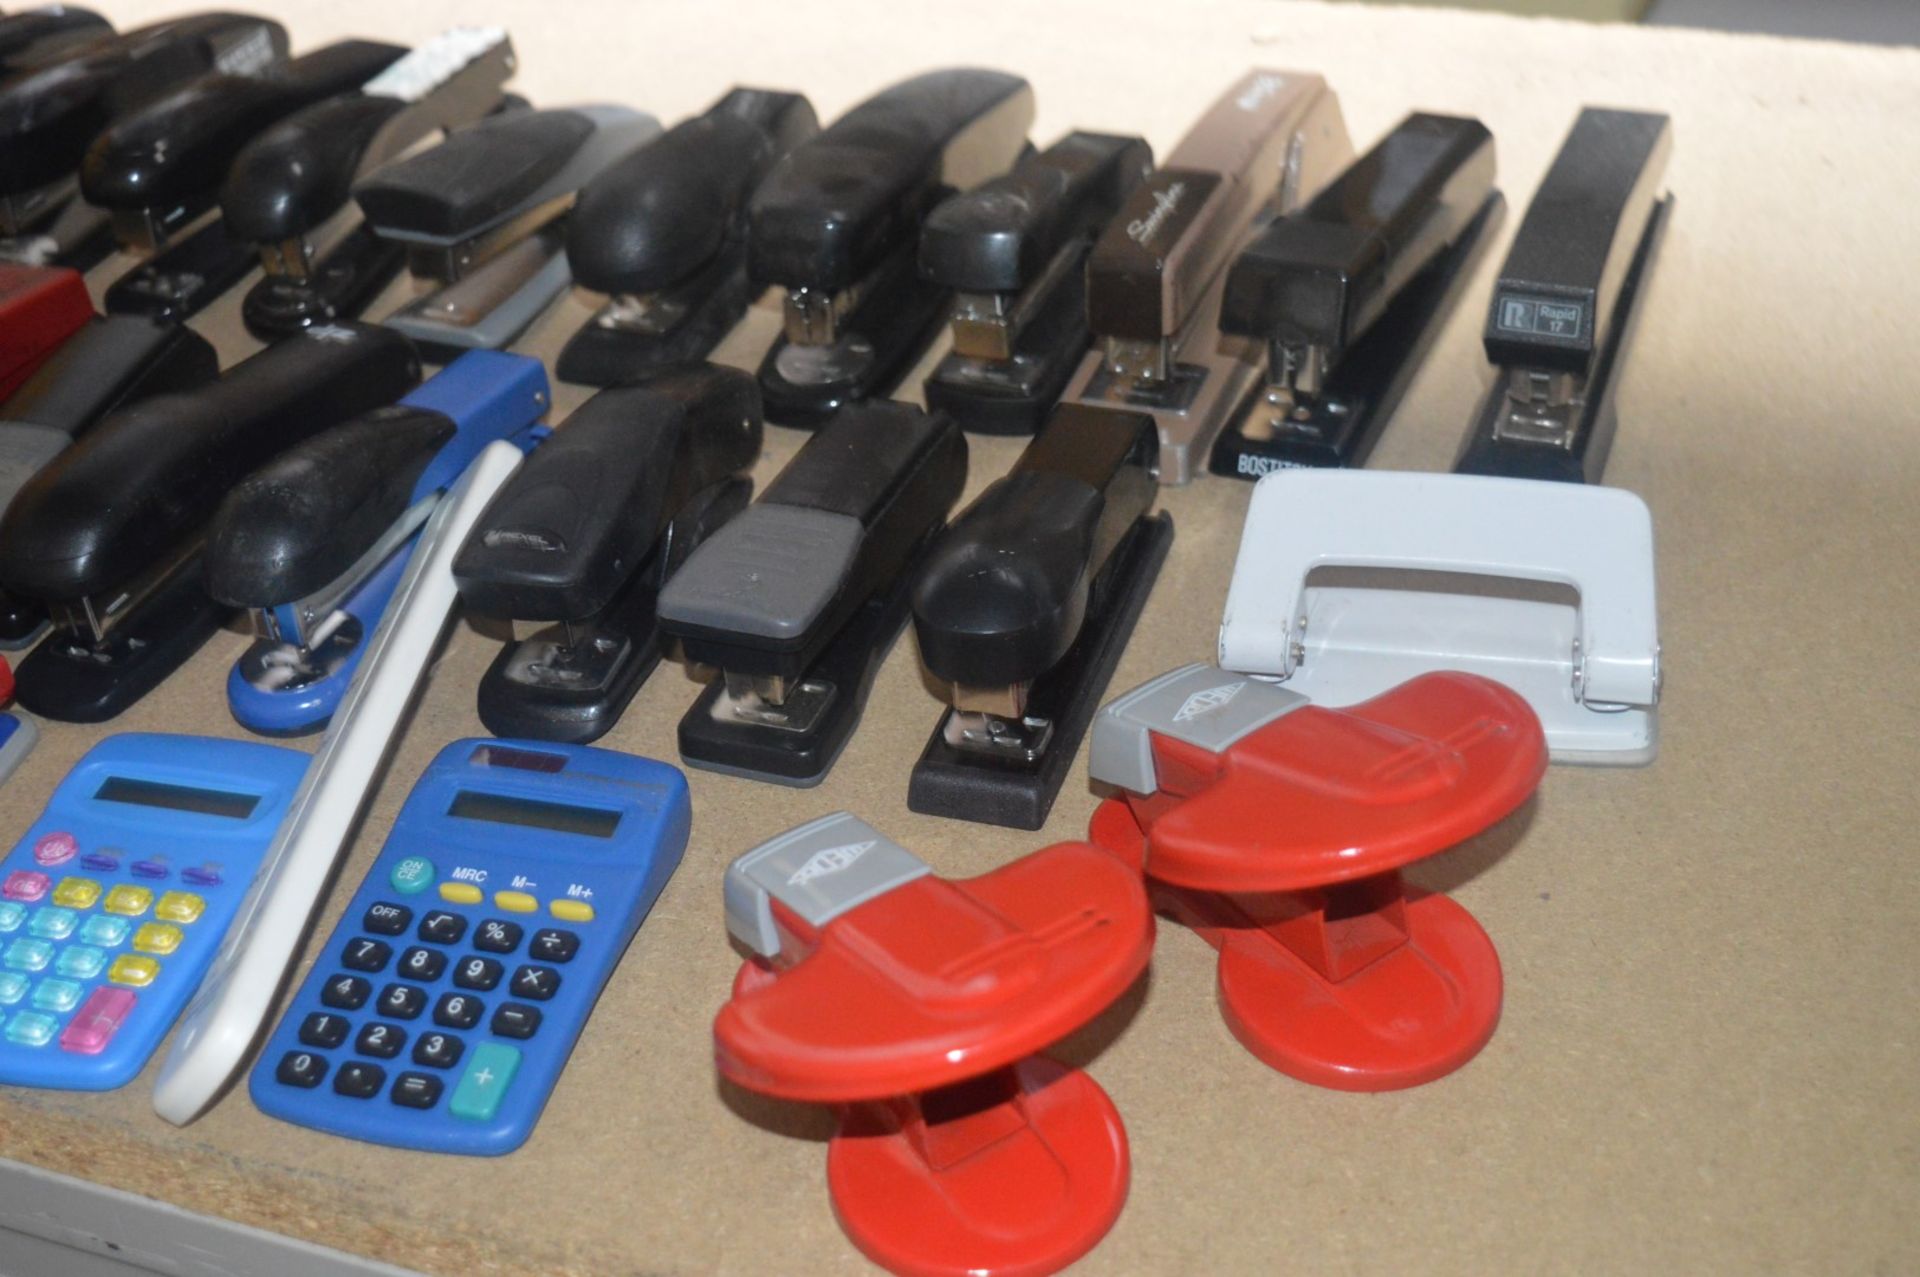 Approx 40 x Various Pieces of Office Stationary - Includes Staplers, Calculators, Hole Punches and - Image 4 of 5